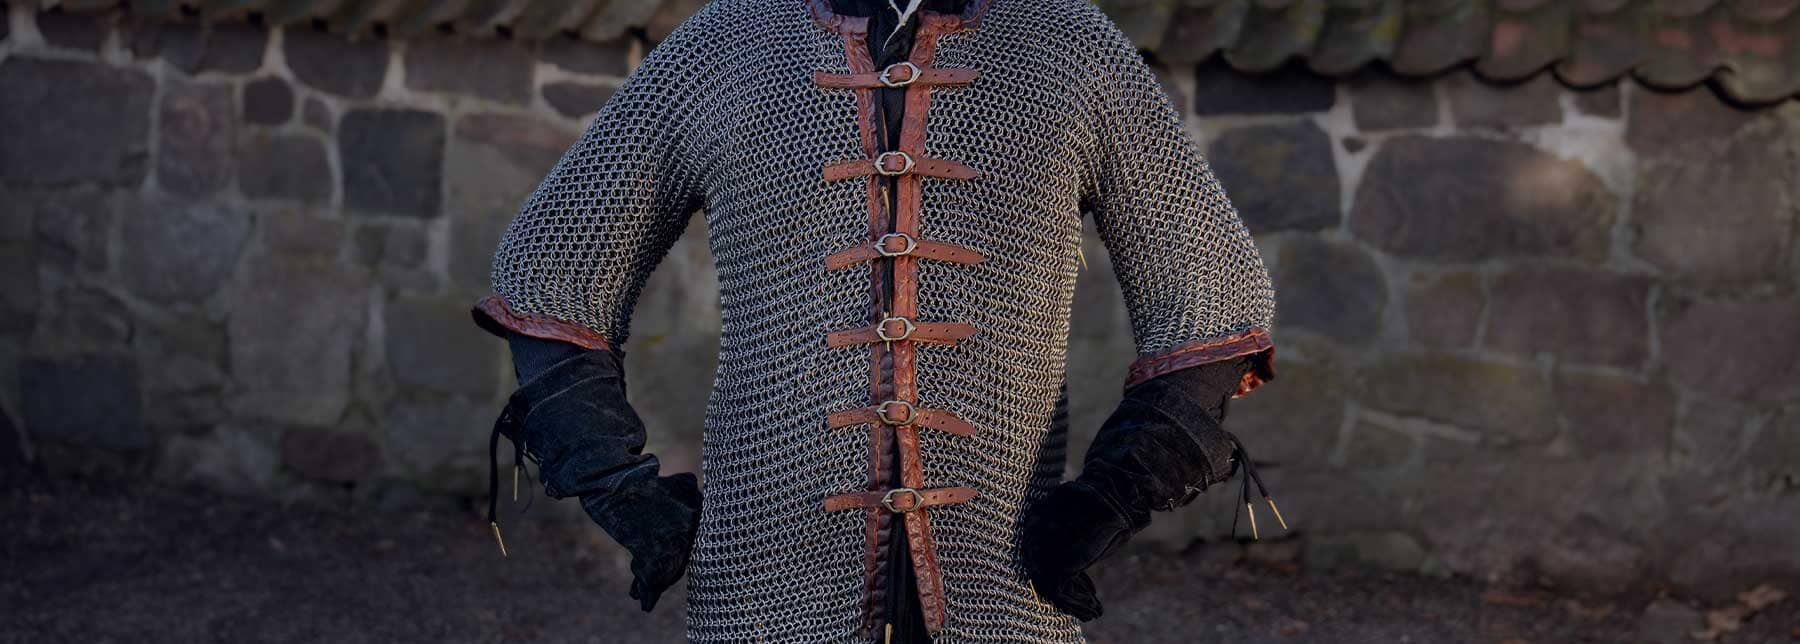 Chainmail Armor for LARP